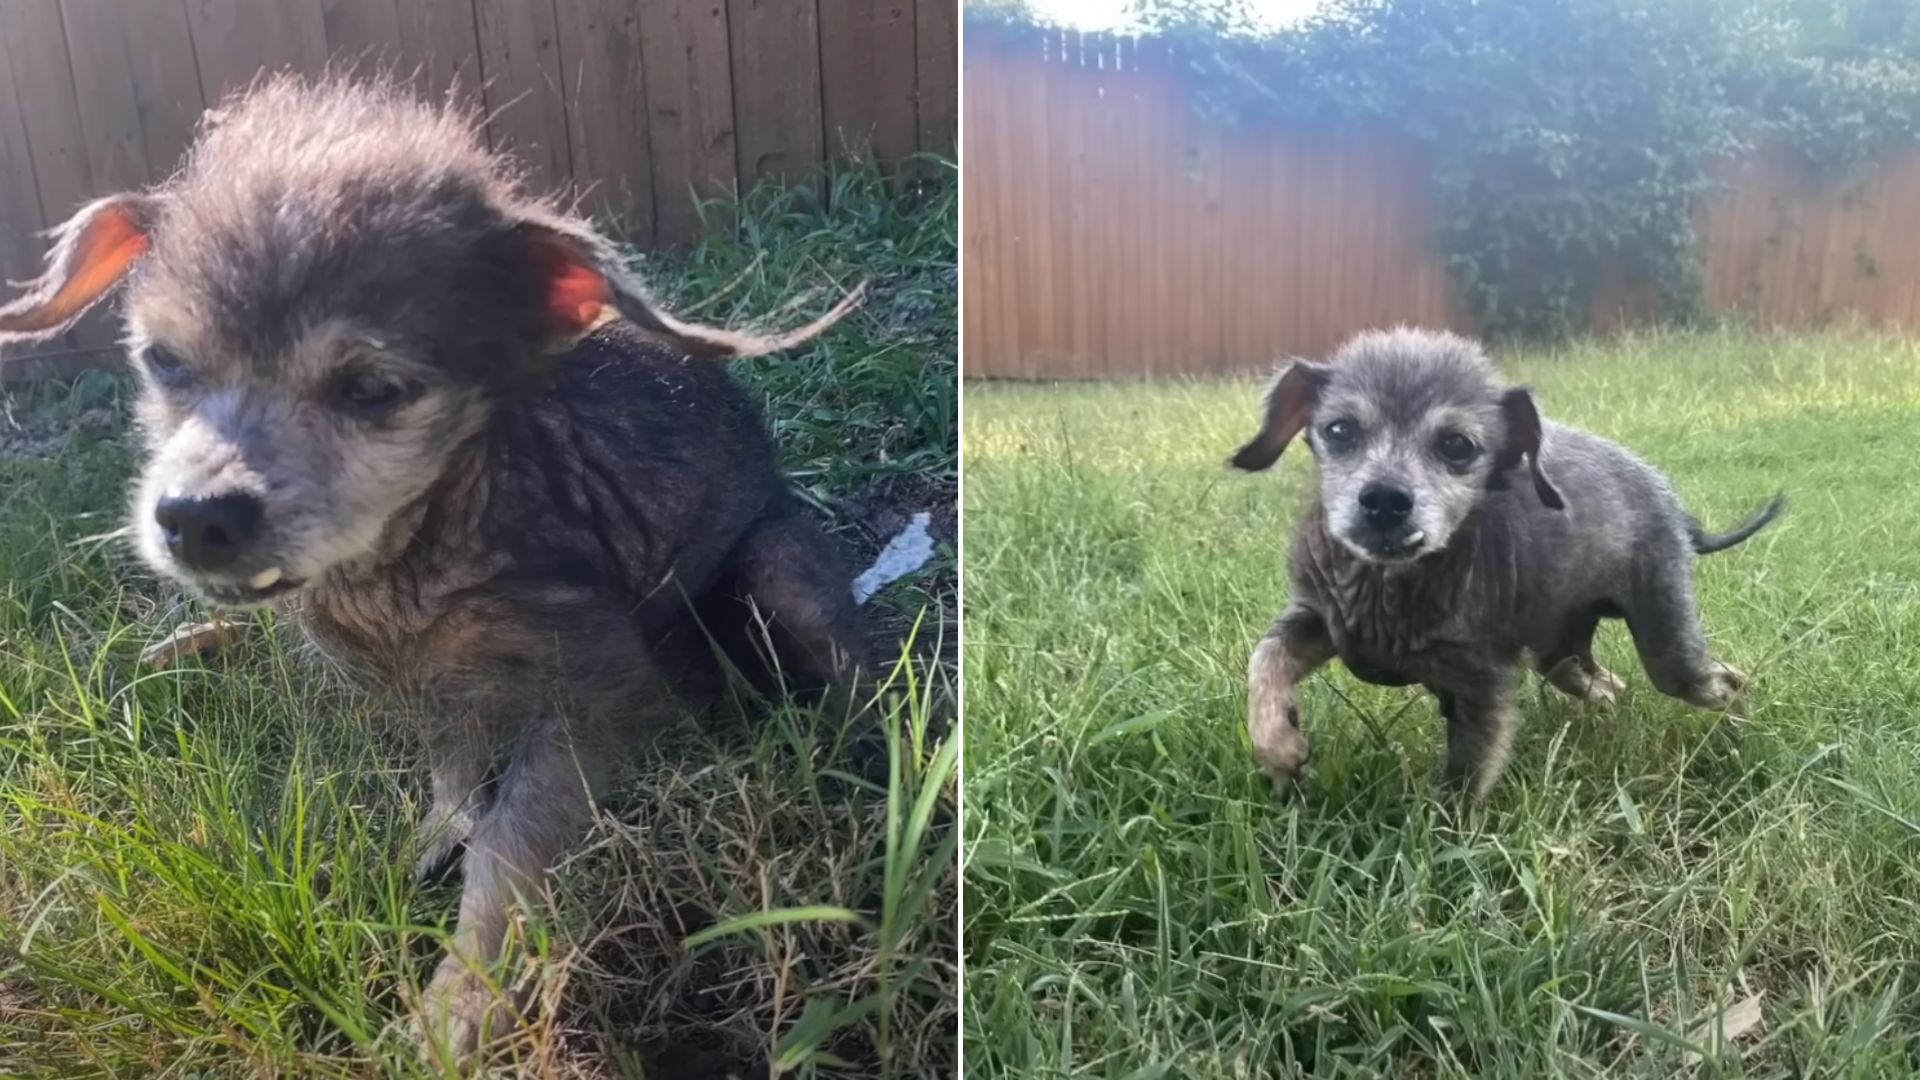 Heartbroken Senior Dog Surrendered To Shelter By His Family Can’t Stop Crying